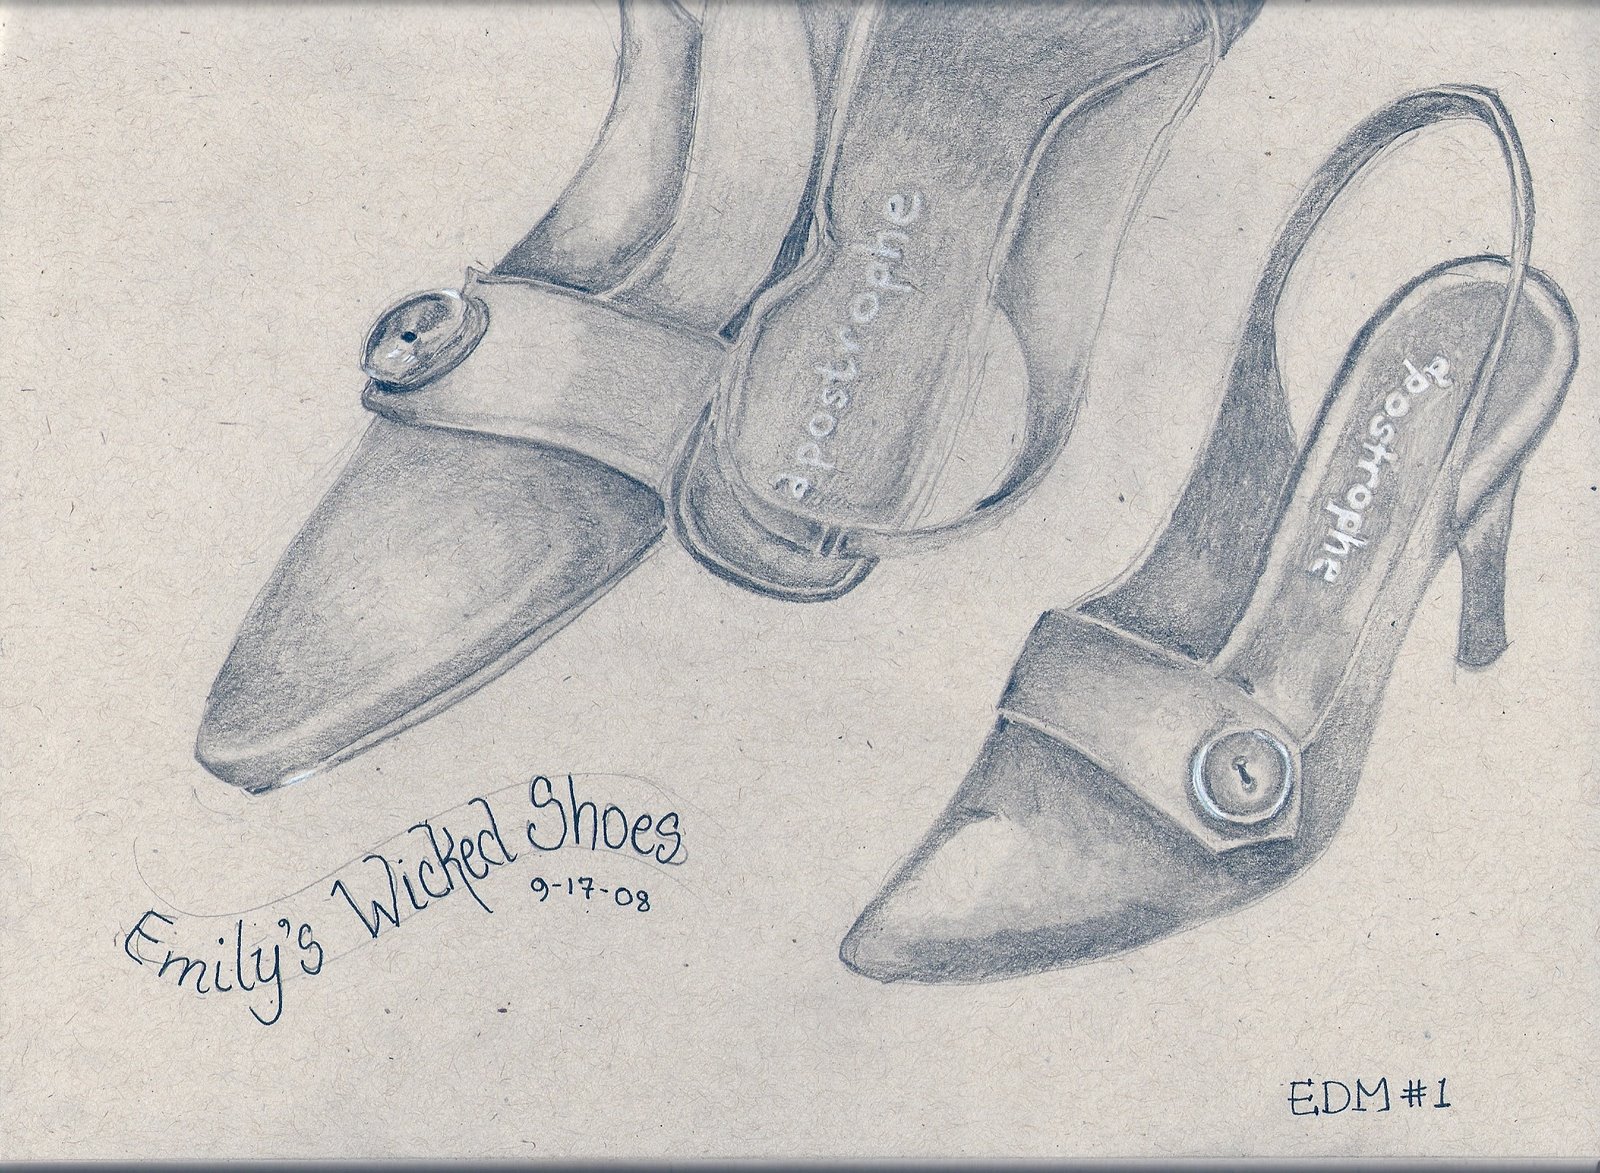 [Emily's+Wicked+Shoes.jpg]